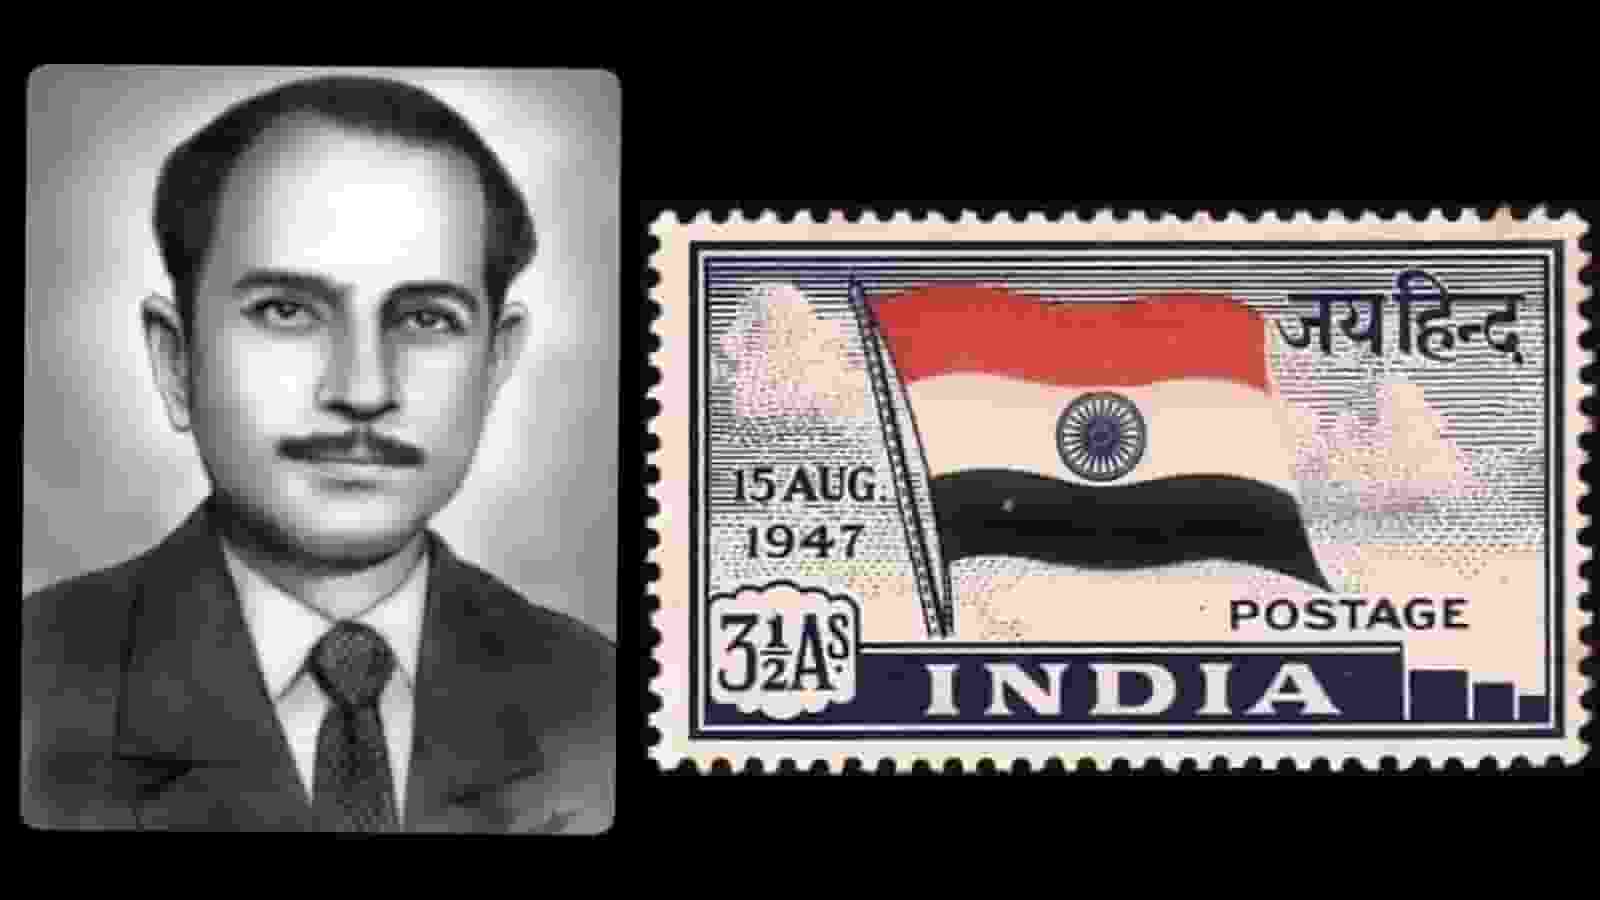 Abid Hasan Safrani known as Zain-al-Abdin Hasan, introduced the slogan 'Jai Hind' translating to 'victory belongs to India' that is being used for official and semi-official purposes including army salutes, moral upliftment and in pop culture movies extensively.